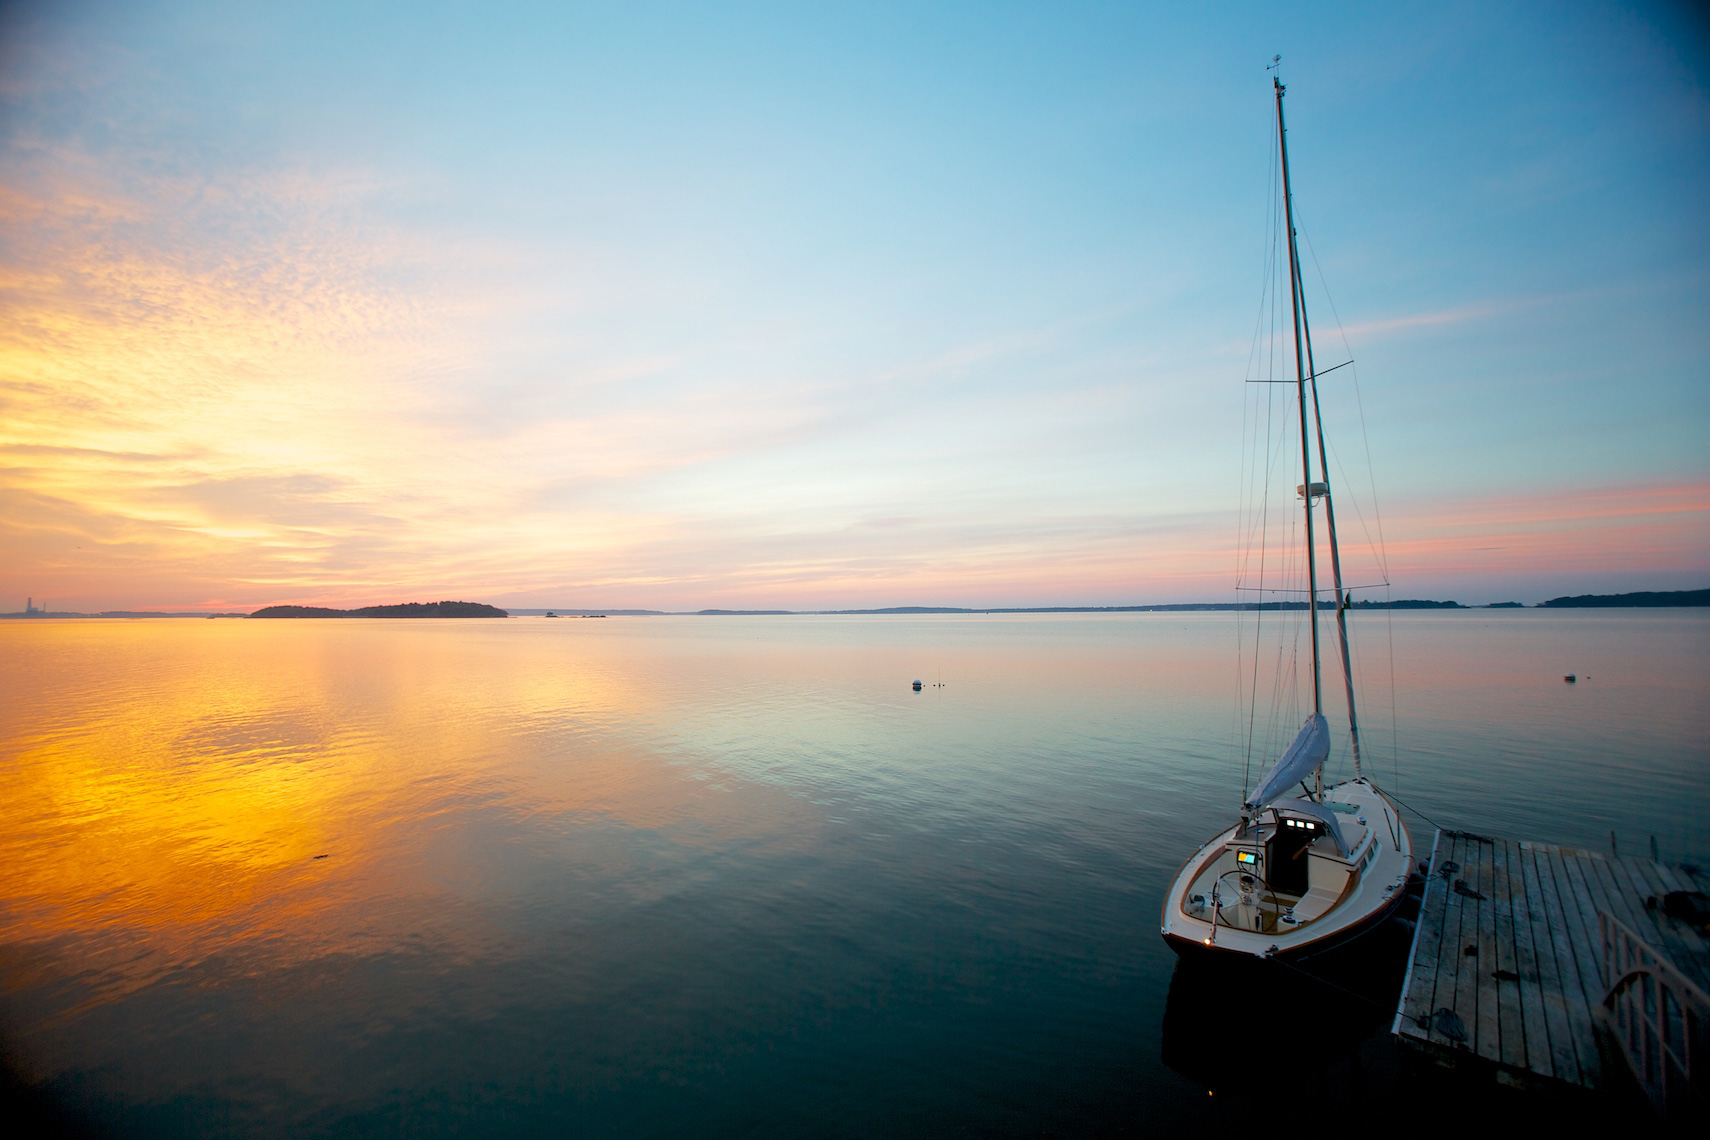 Sunrise with sailboat in MAine